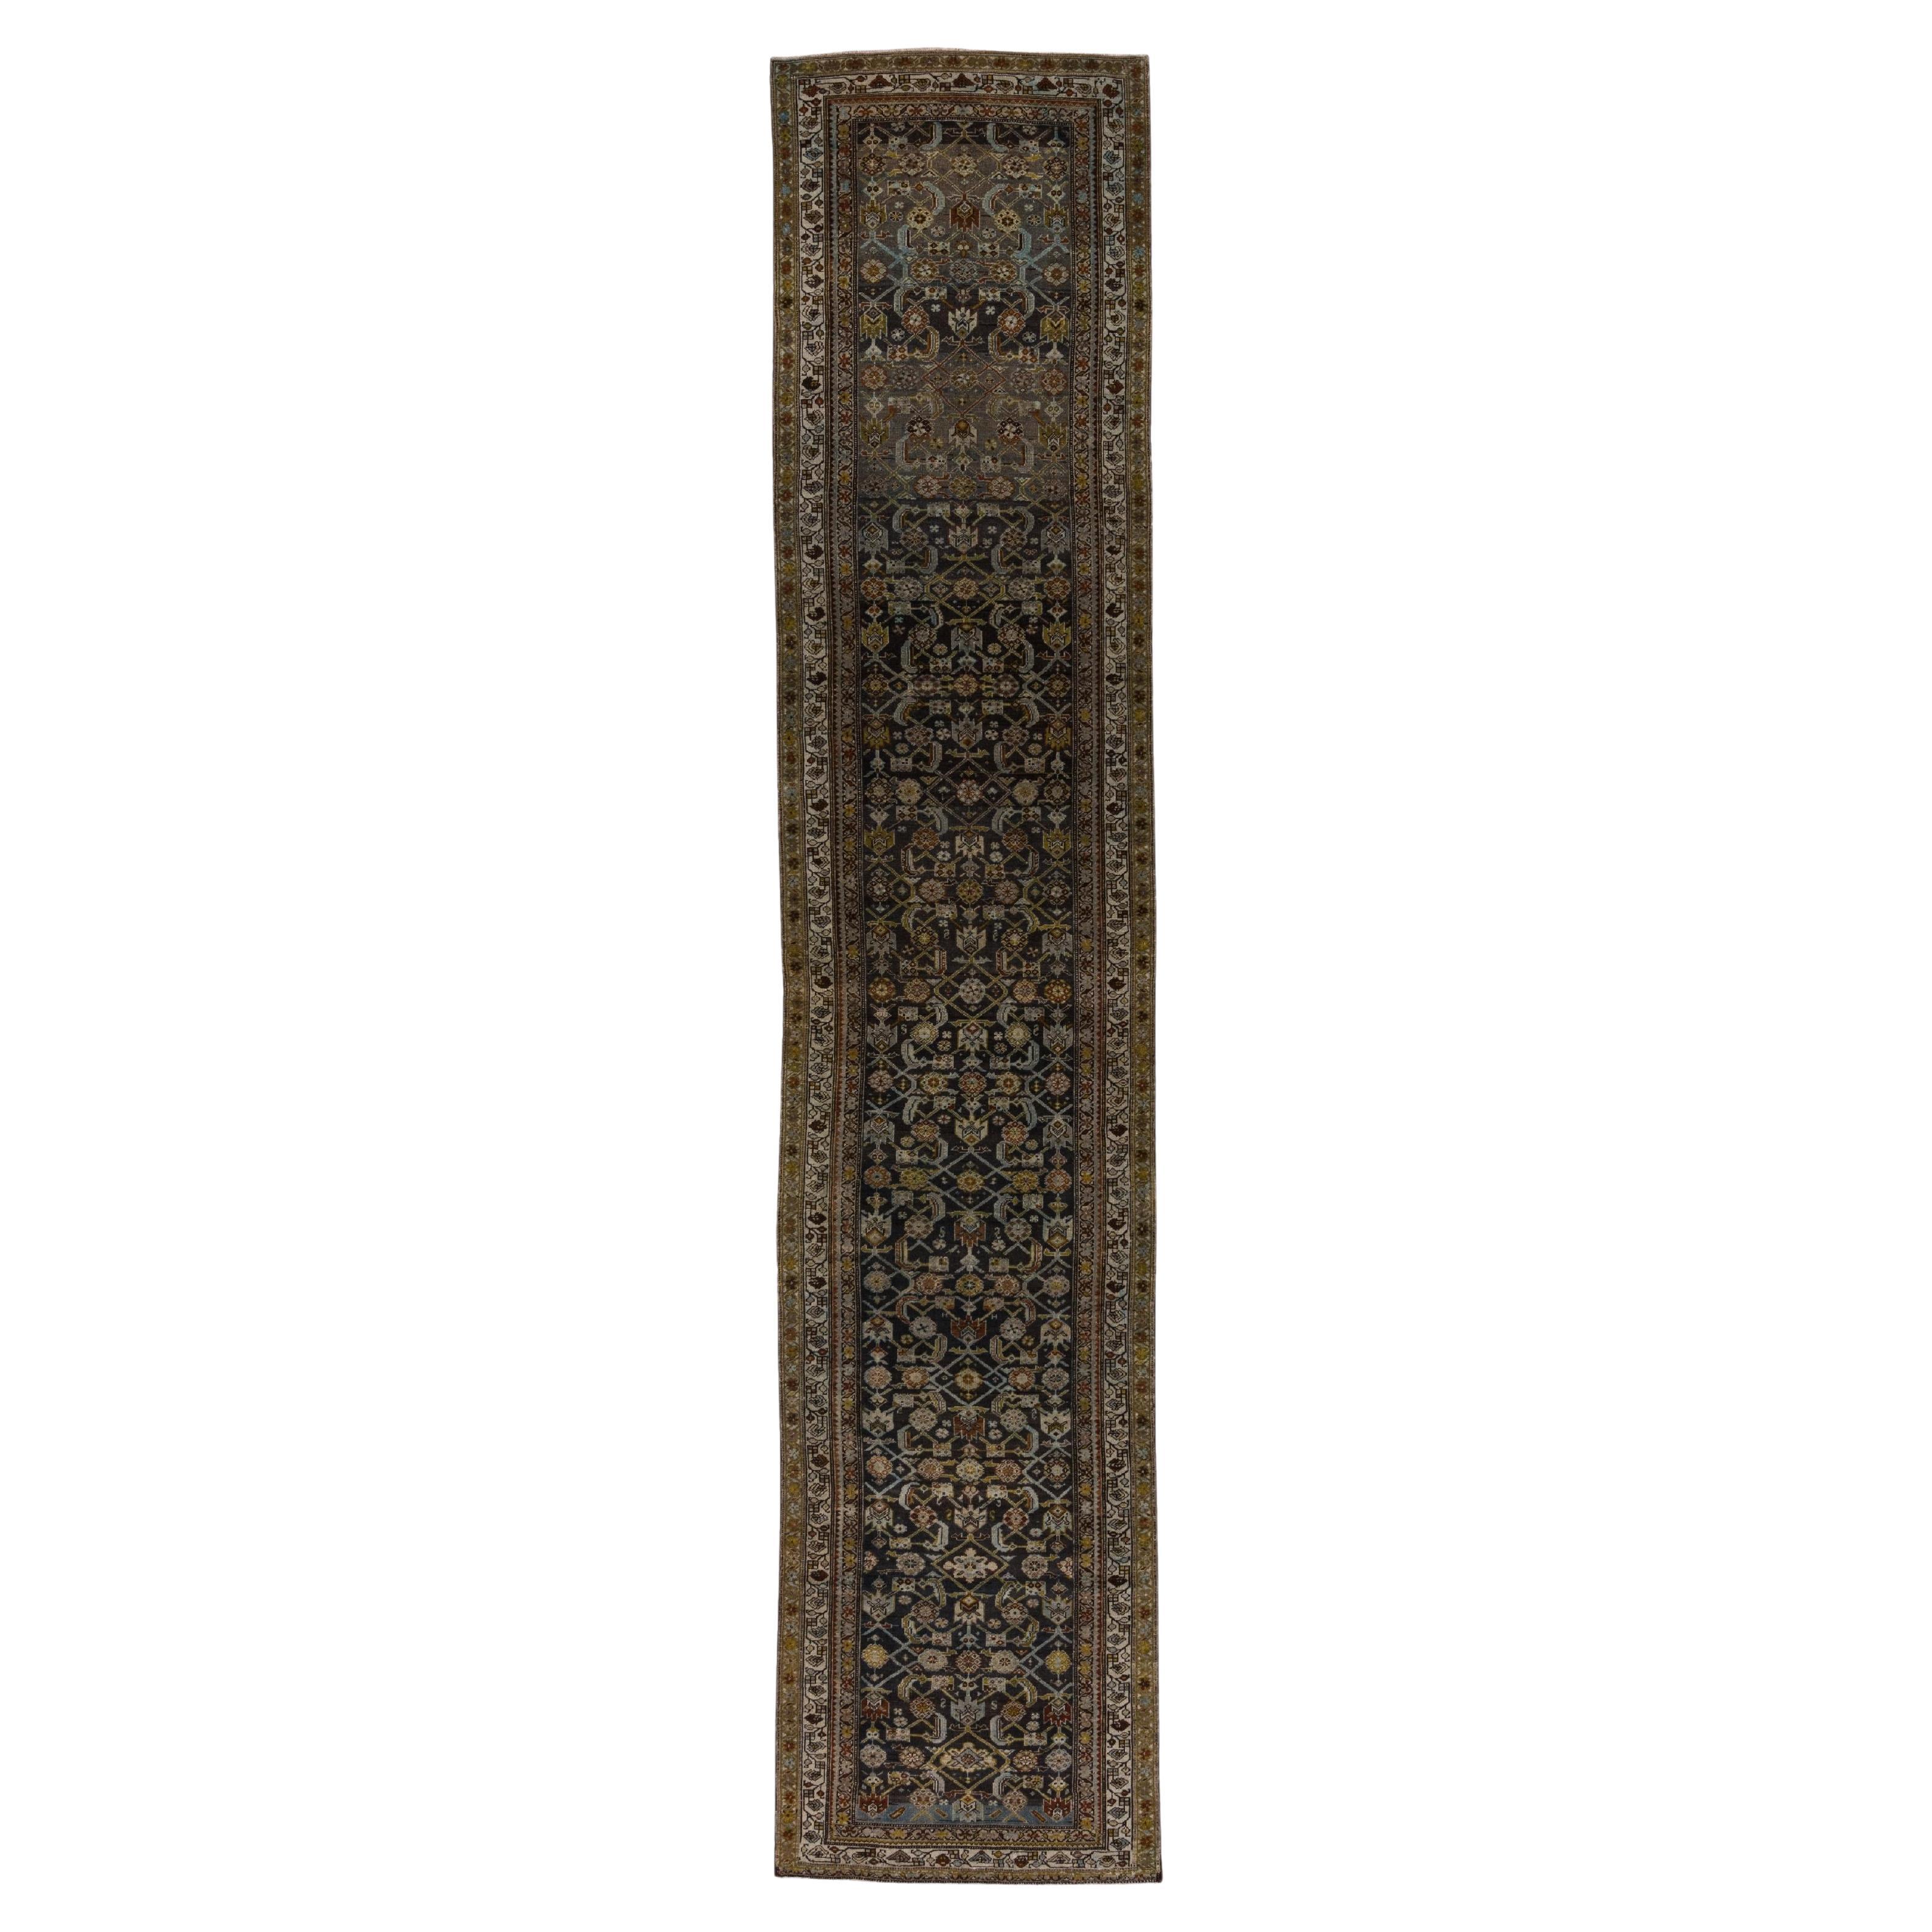 Antique Persian Malayer Long Runner, Charcoal Herati Field, Olive & Gray Borders